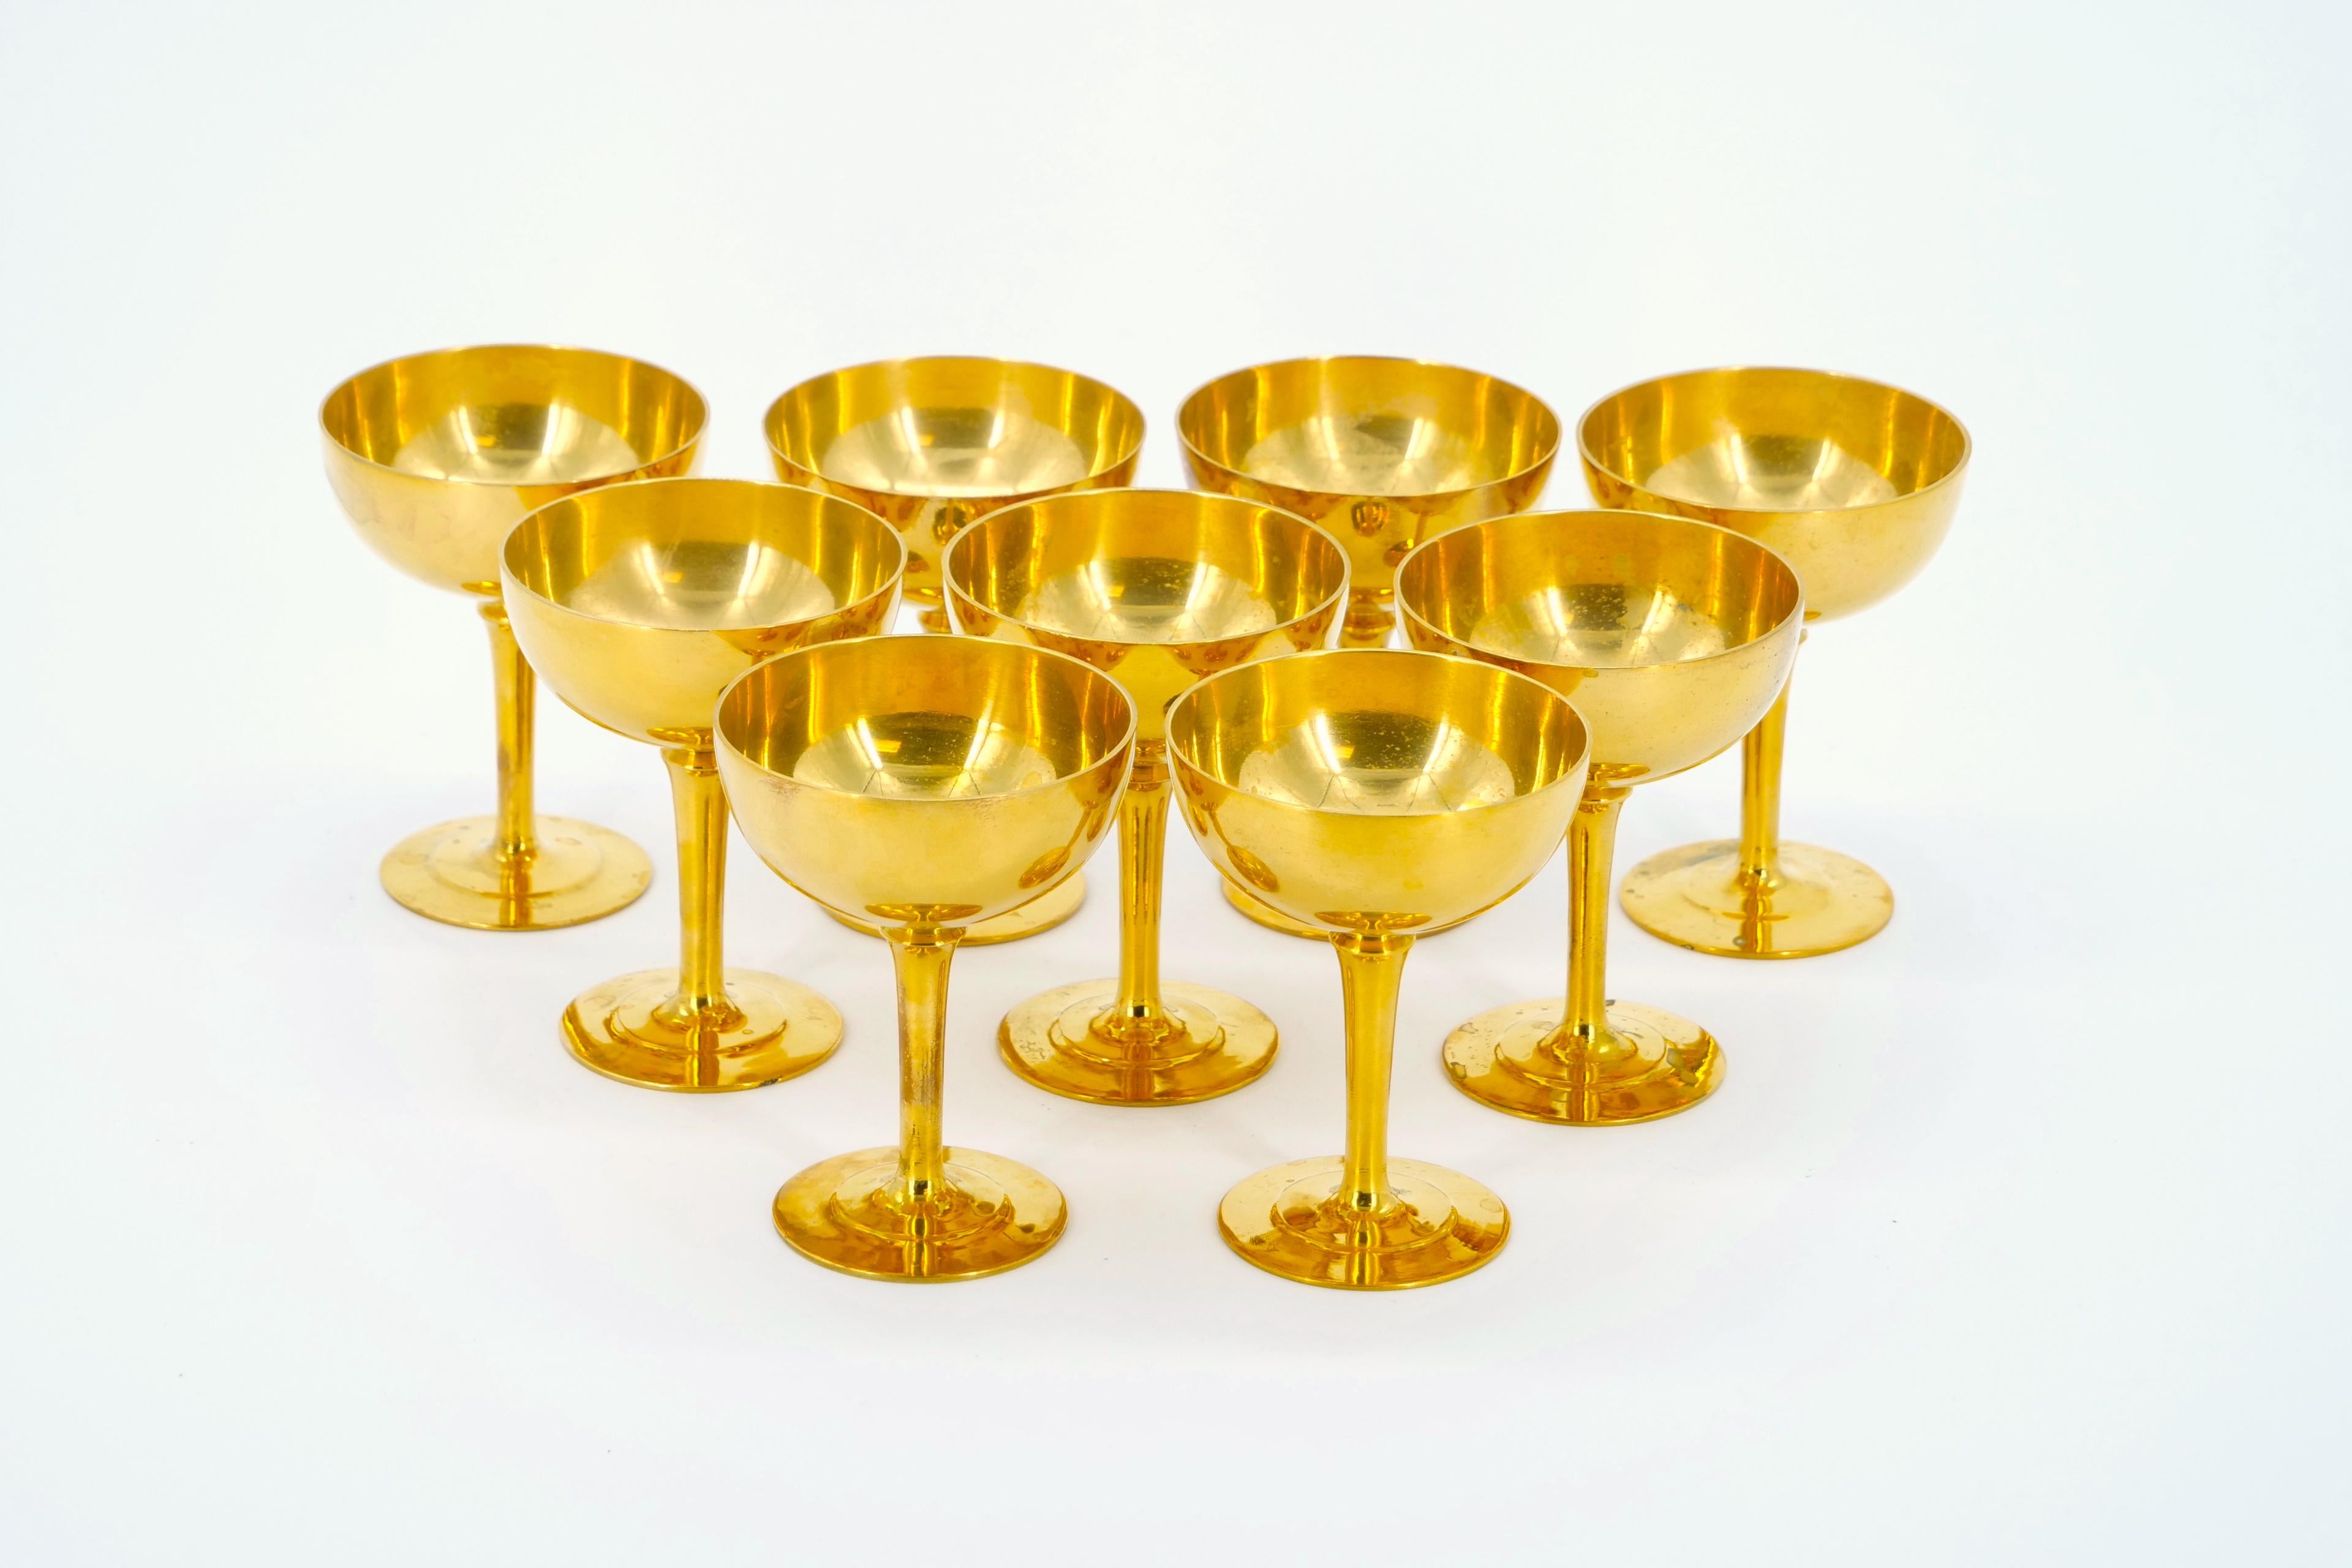 Indulge in the opulence of our exquisite English barware and tableware collection with this stunning set of silver-plated and gilded champagne coupe / wine goblets, designed to elevate your dining experience to new heights. Meticulously crafted to